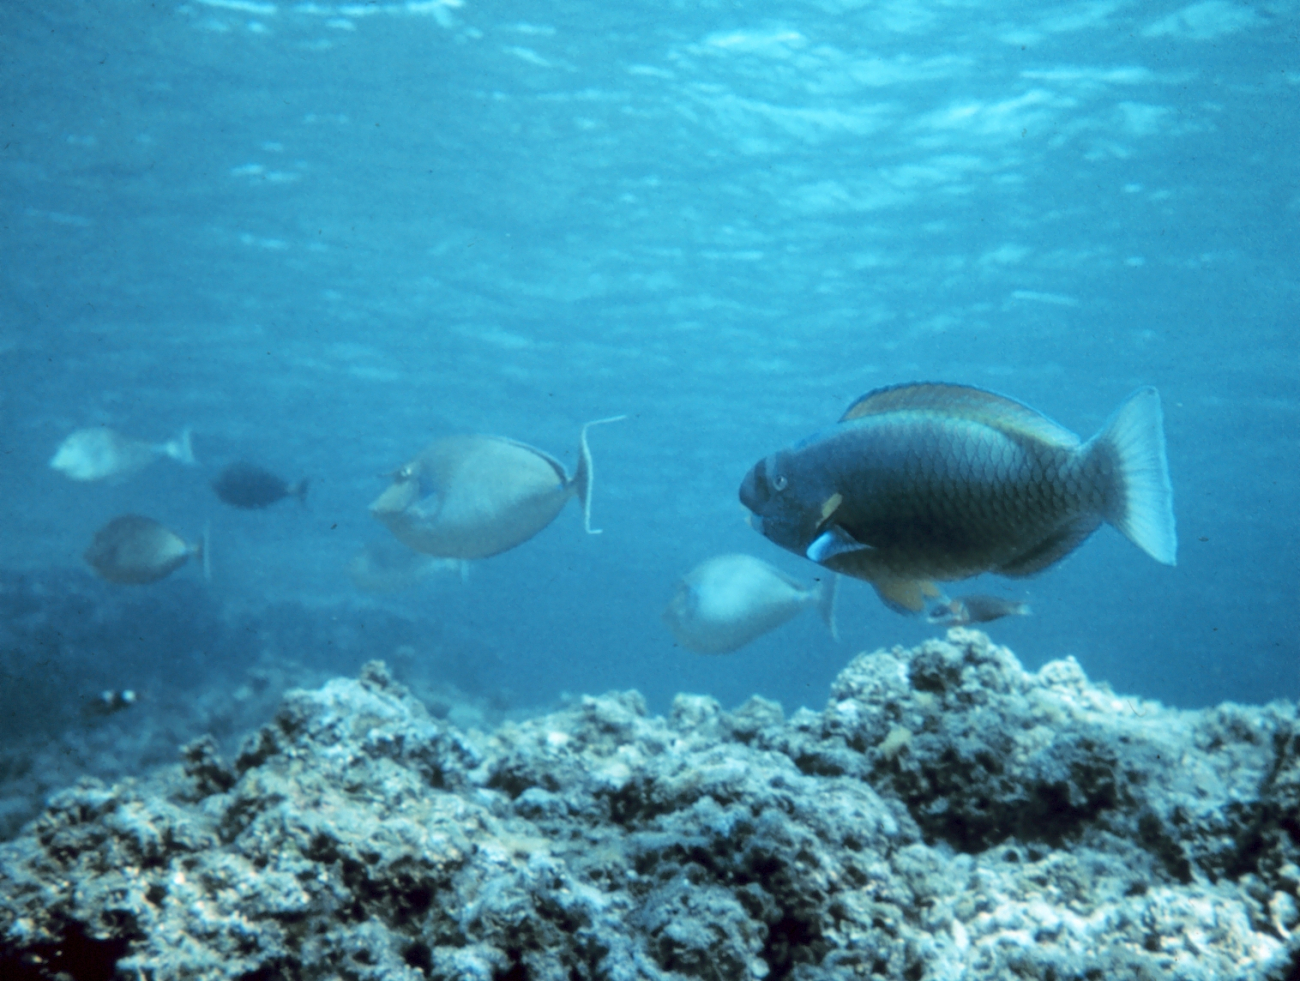 Parrotfish and triggerfish